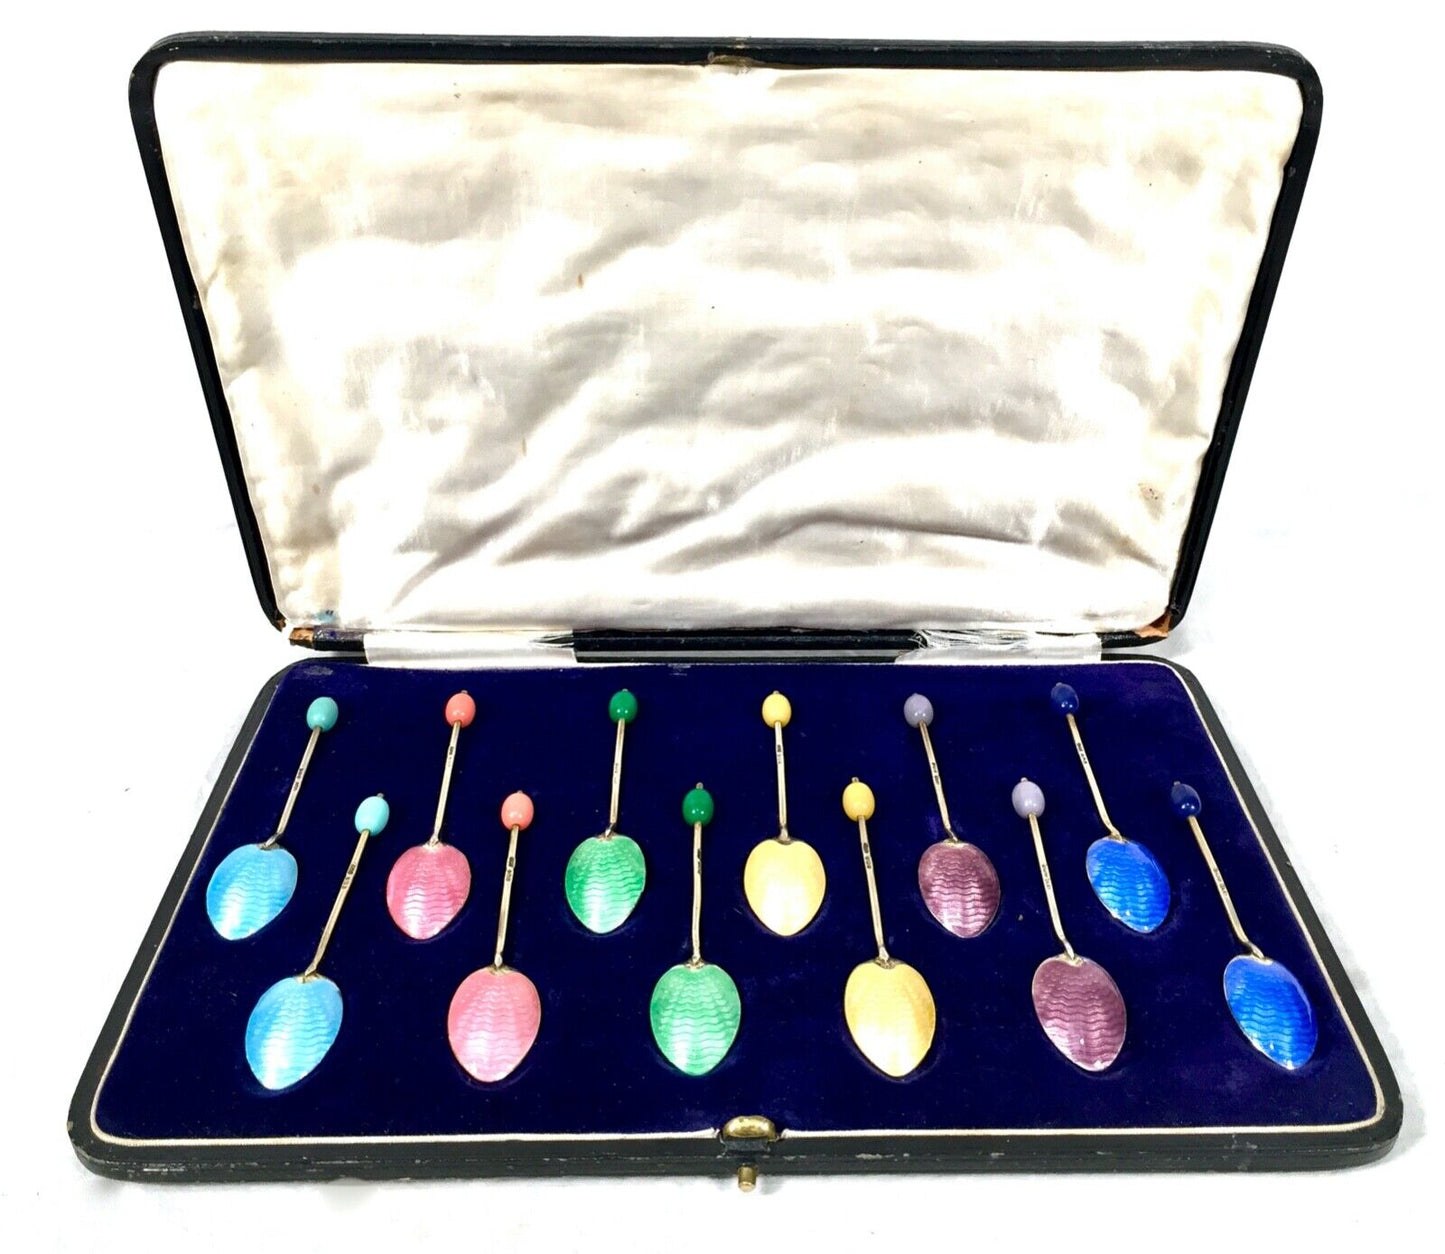 Antique Sterling Silver & Enamel Spoon set by Turner & Simpson Boxed / Art Deco